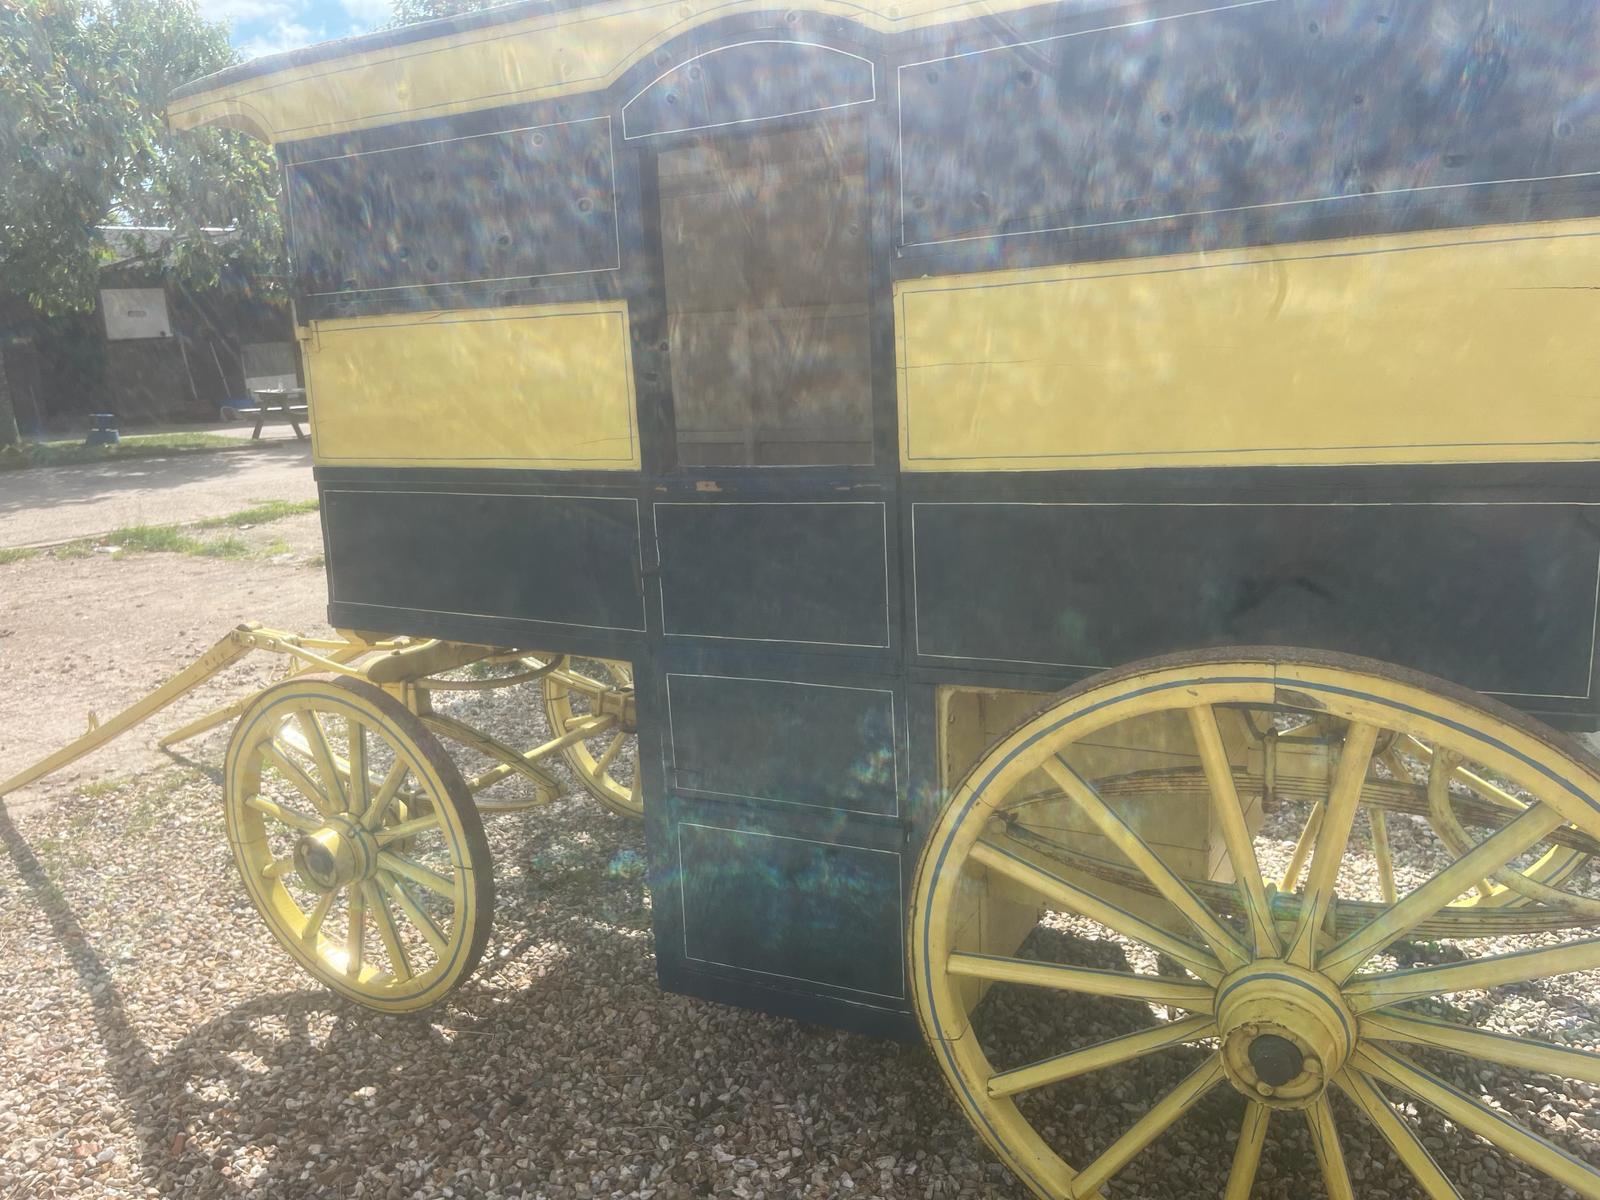 AMERICAN BUTCHER'S SHOP, a 4-wheeled enclosed van painted dark blue and yellow on iron tyres. - Image 7 of 14